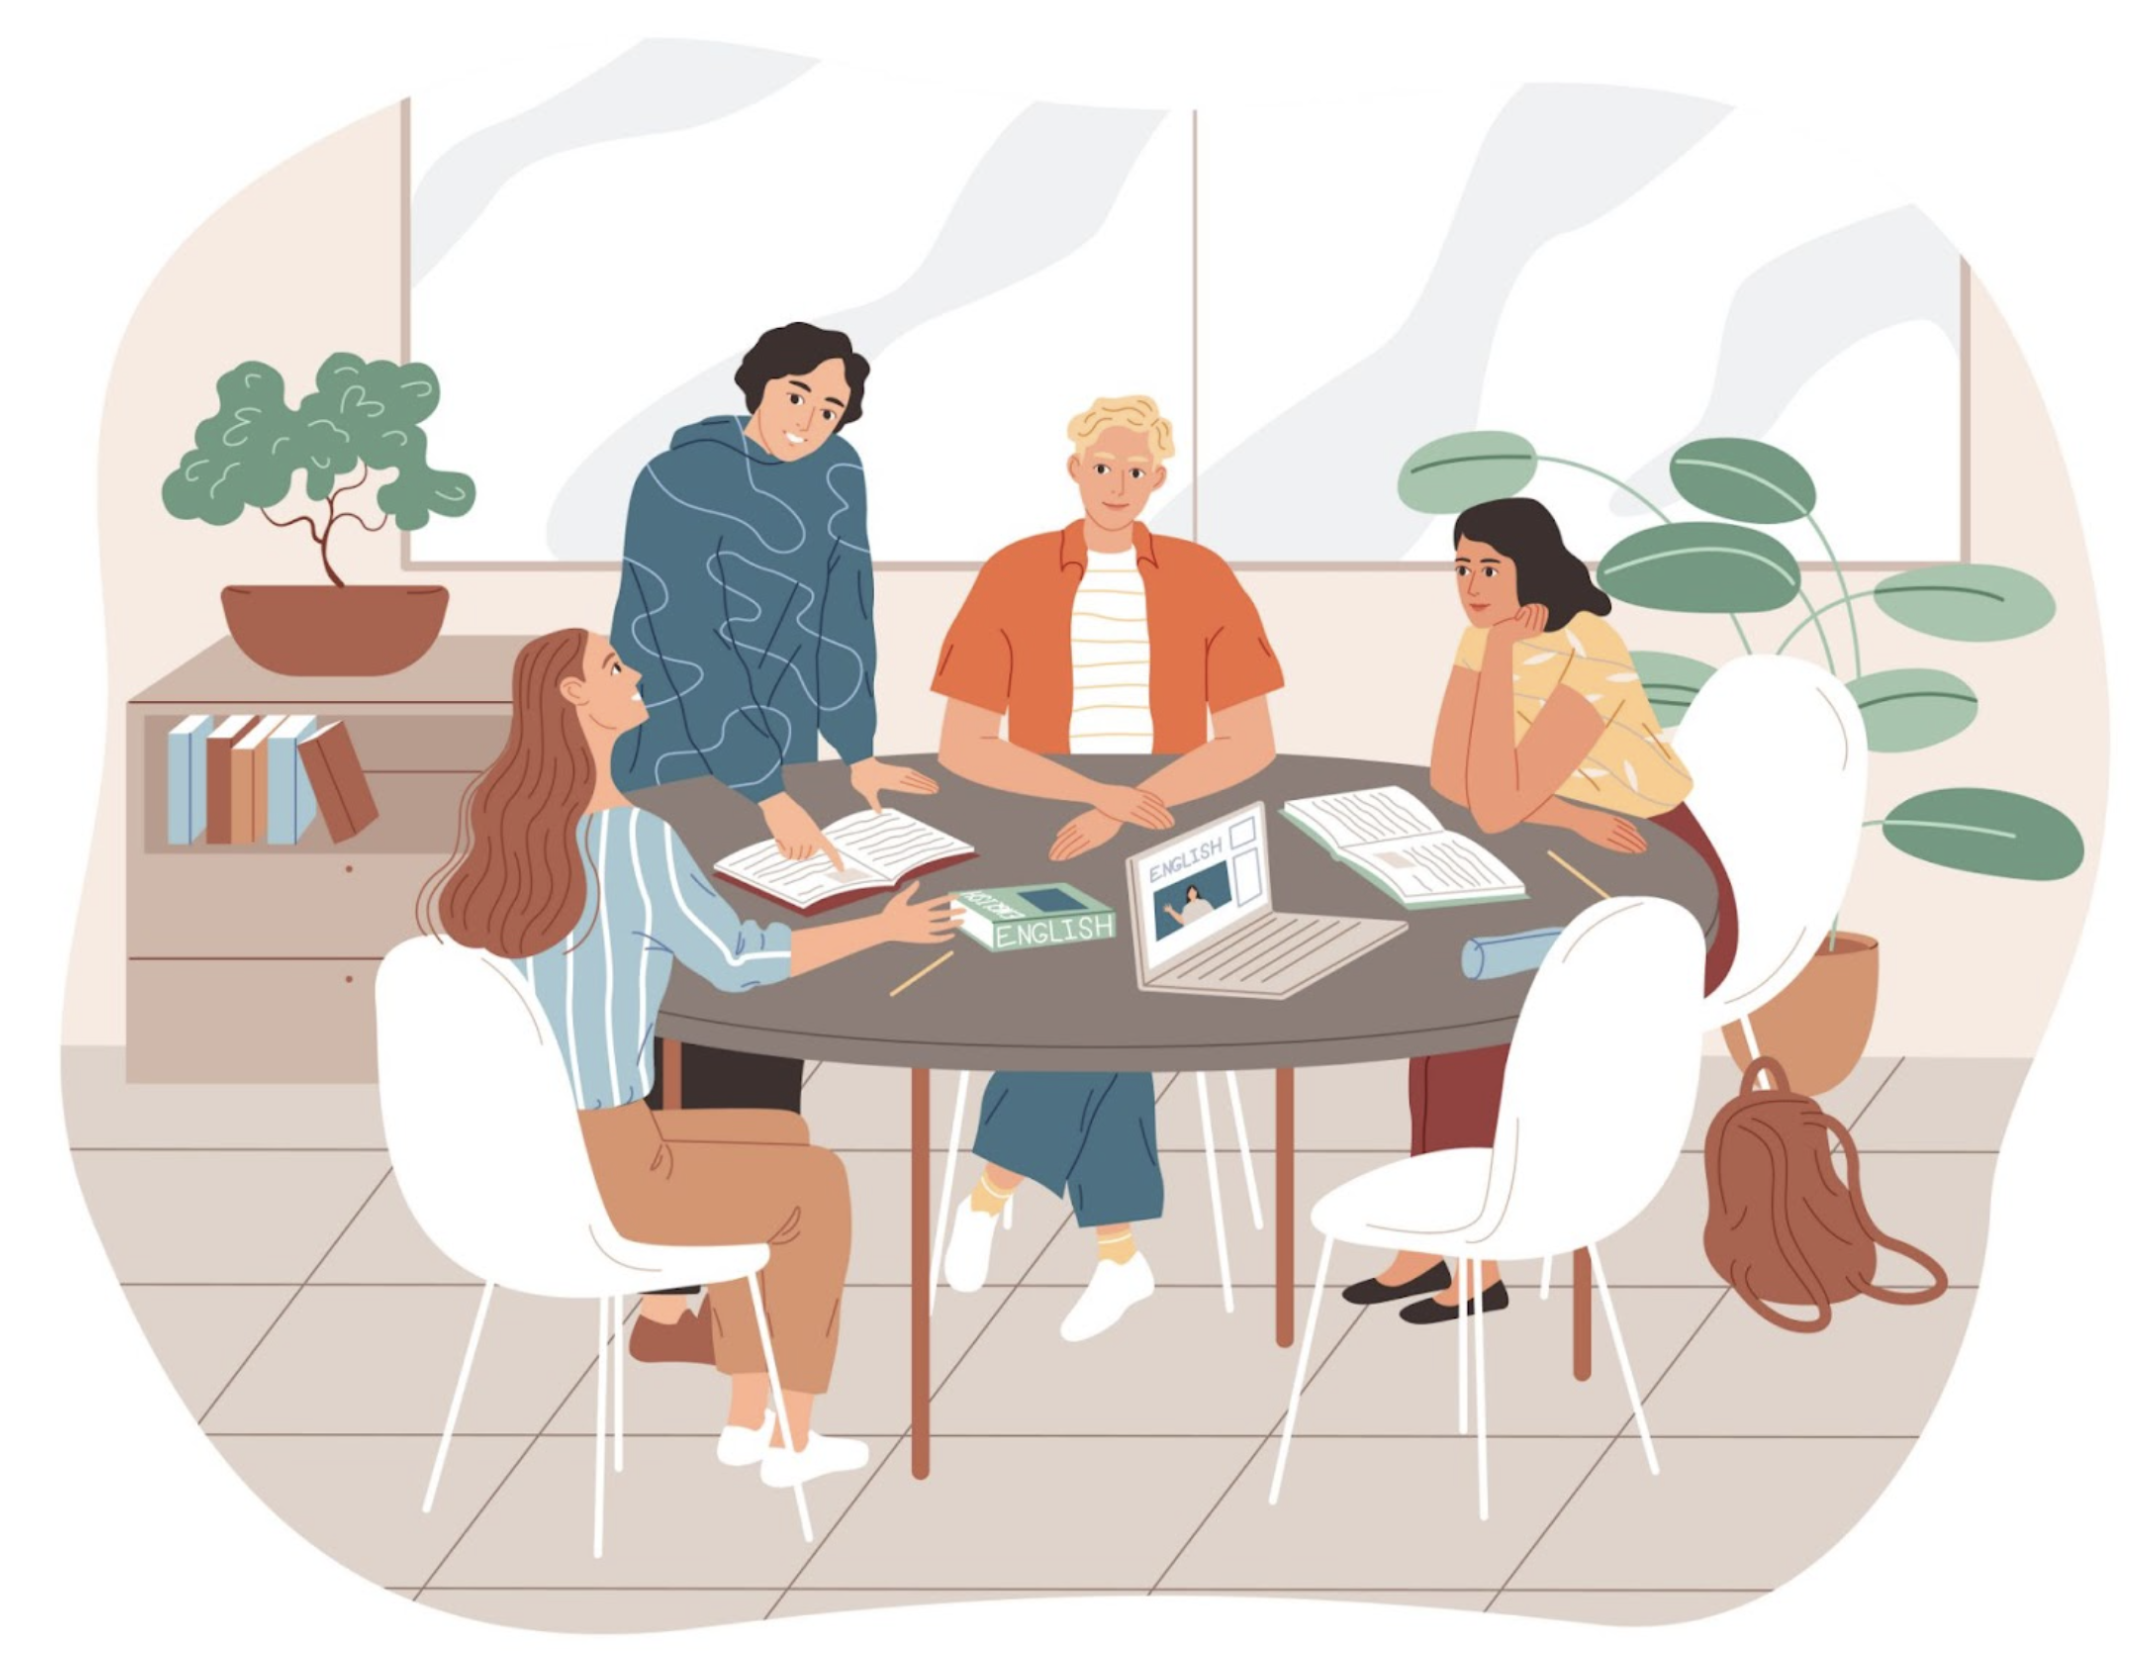 An illustration of people collaborating around a table